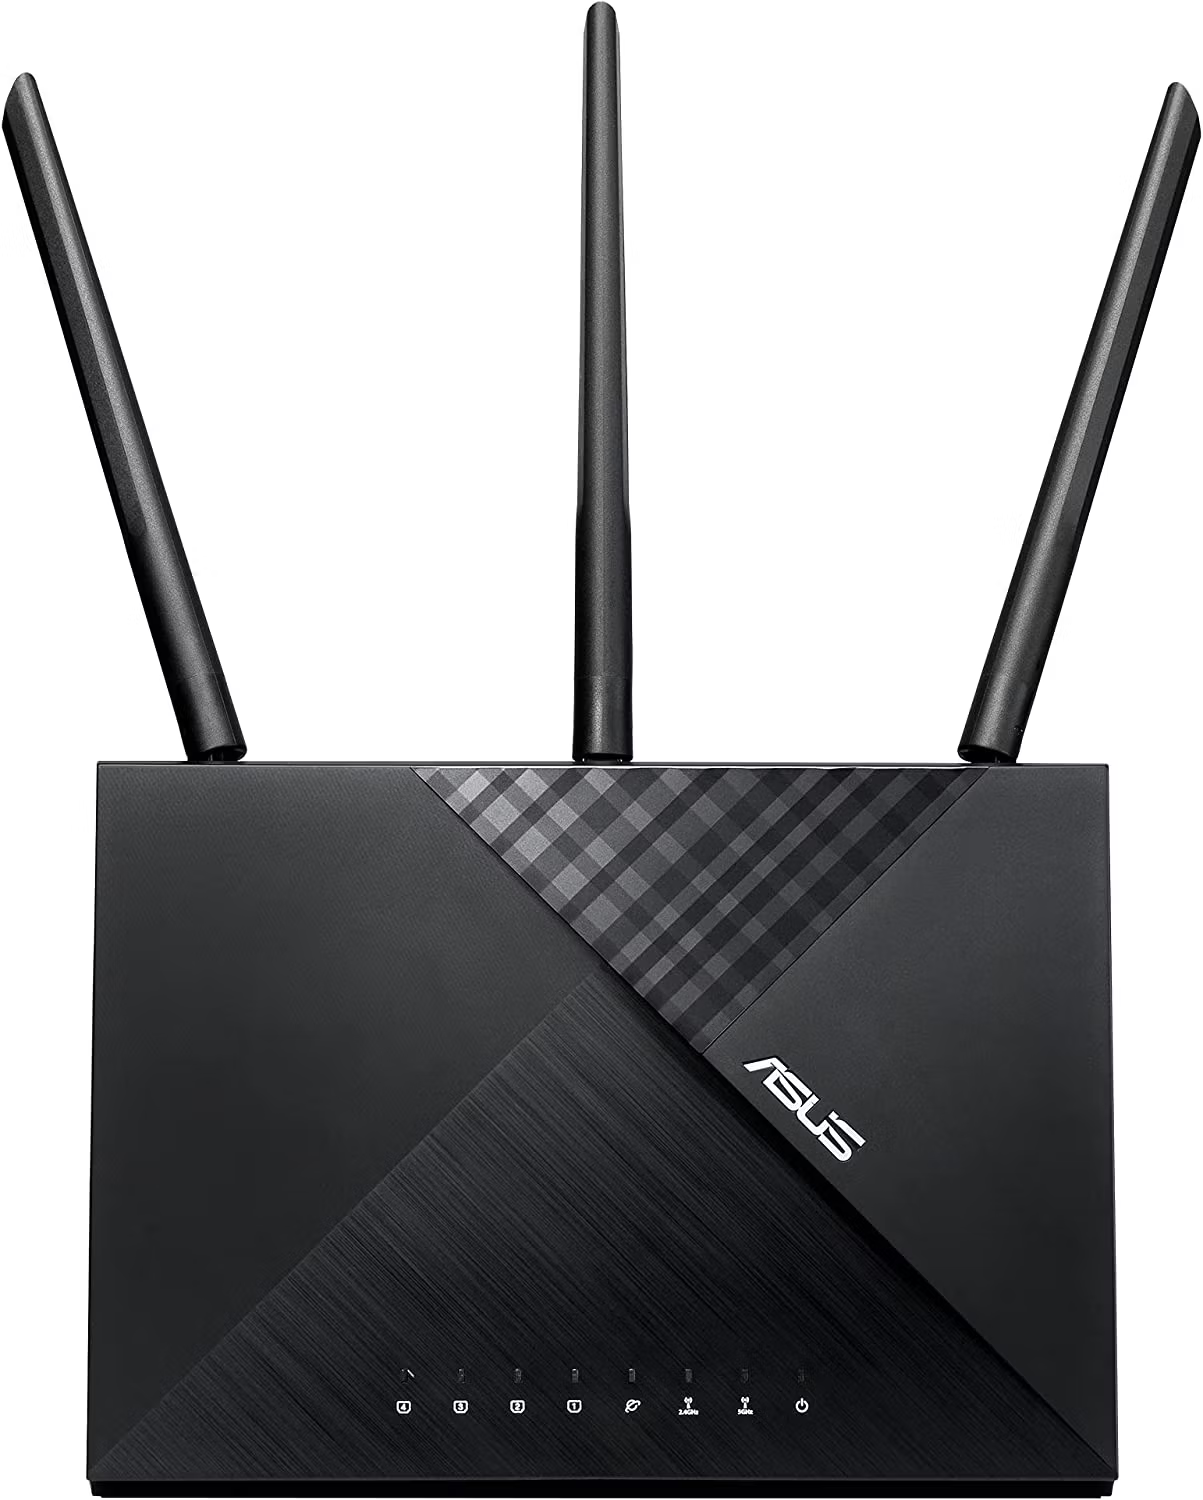 asus-ac1750-rt-acrh18-wi-fi-router | Best Modem For Gaming | Trickproblems.com